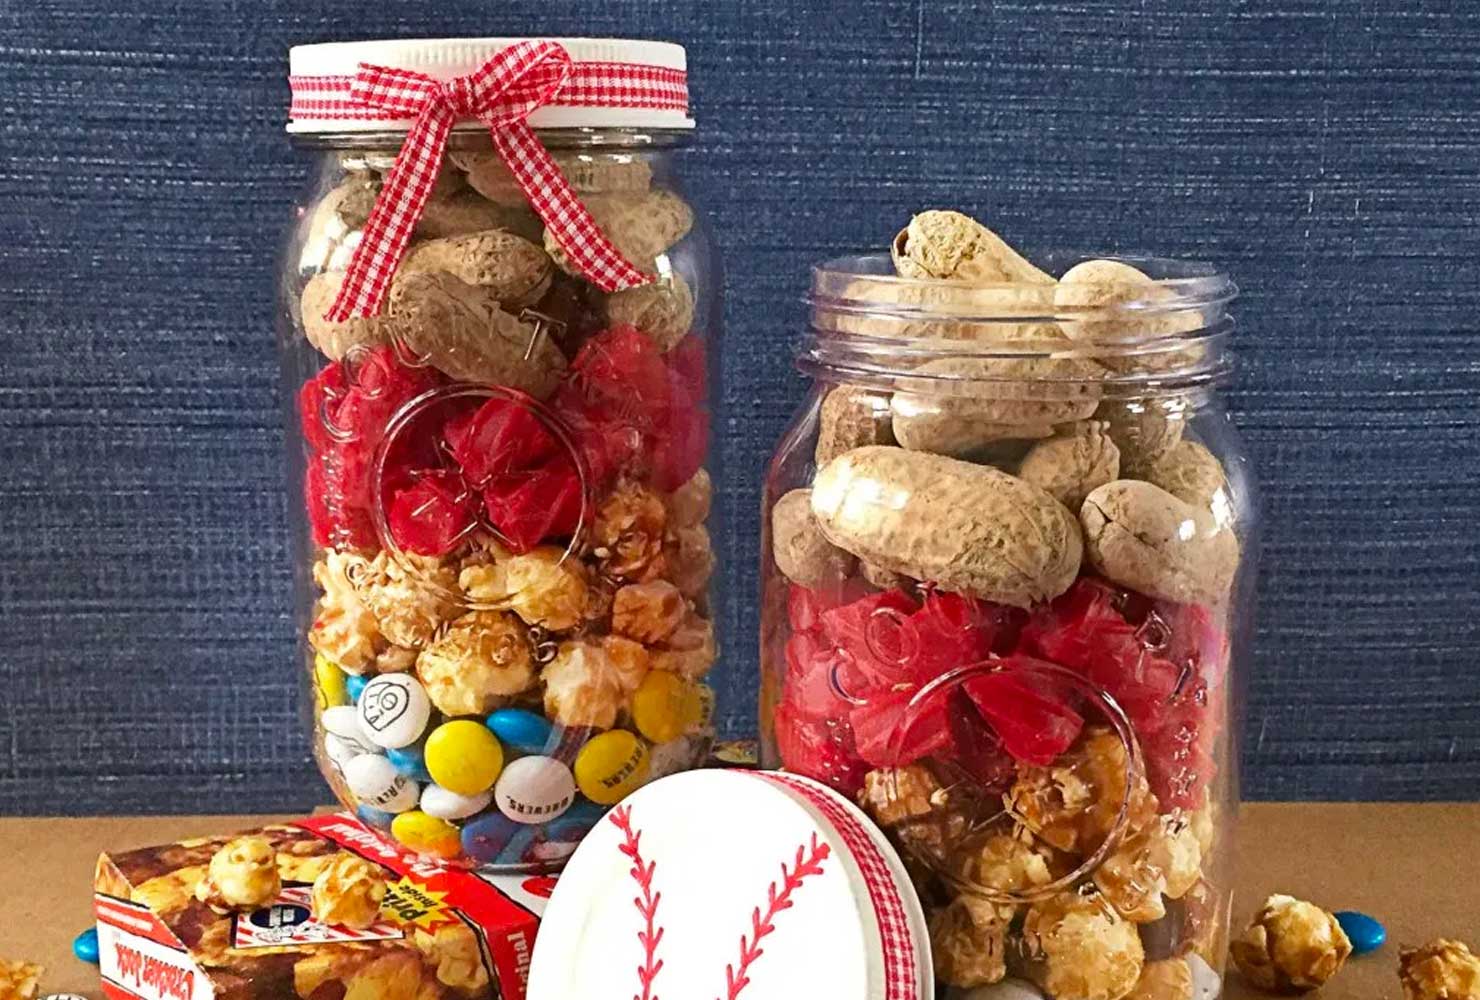 Trail mix in mason jar with lid decorated like a baseball.